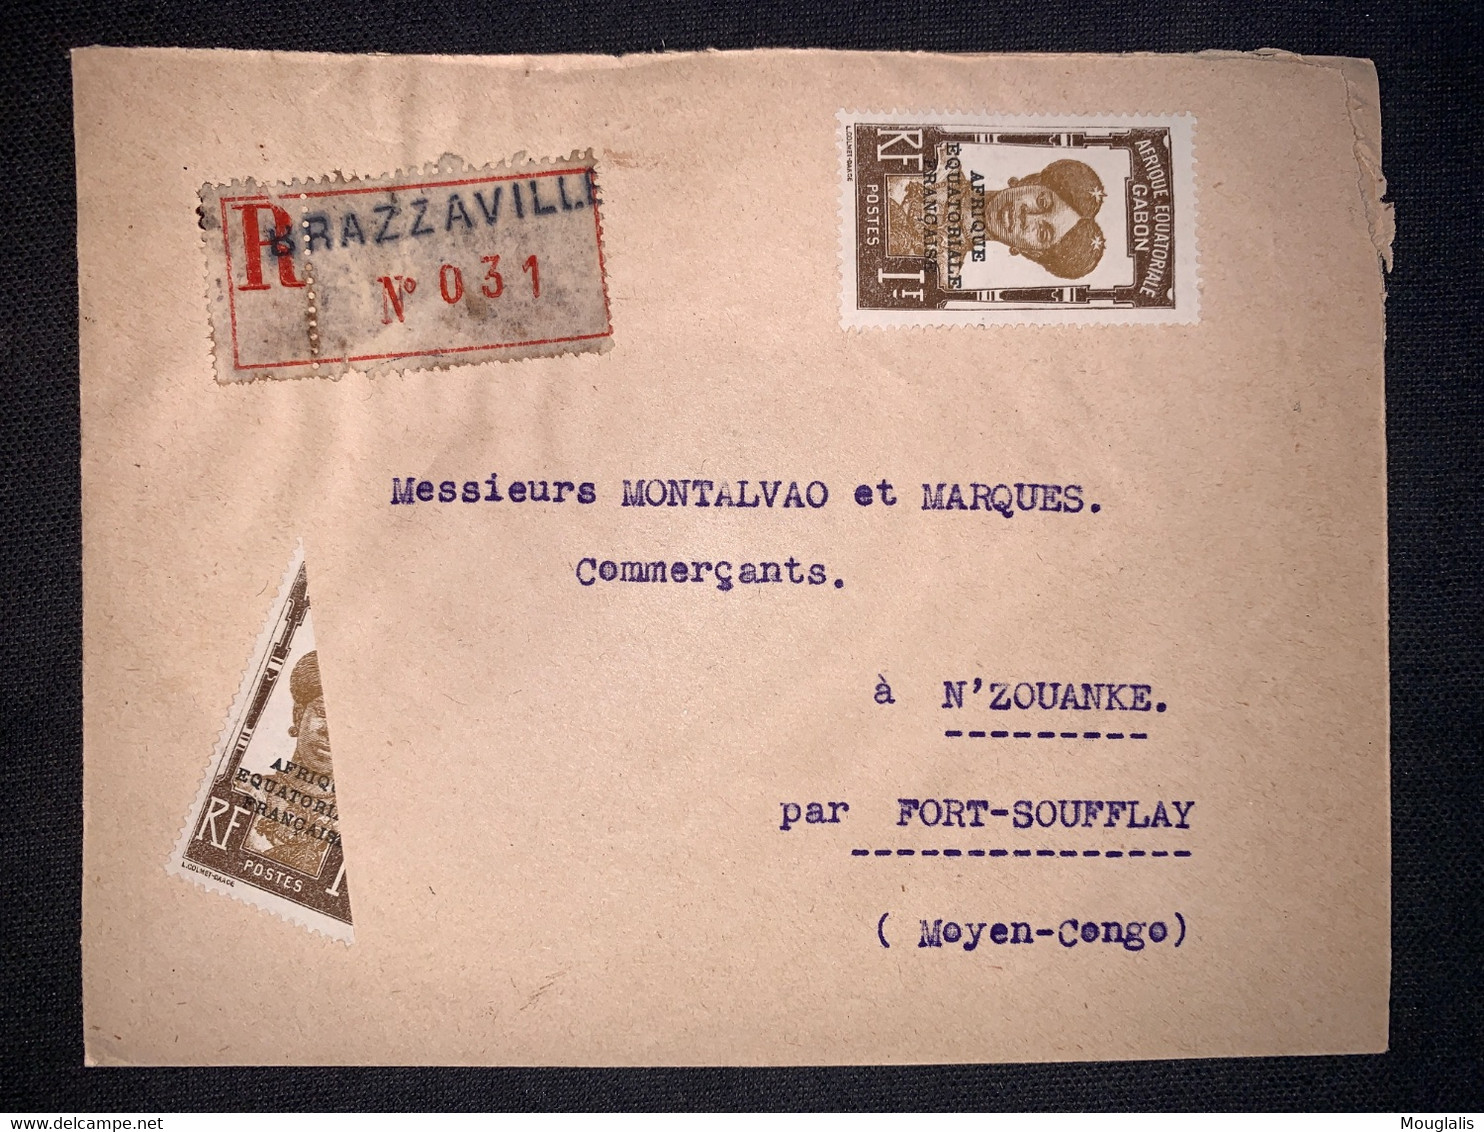 Lettre Recom Colonies Congo 2 Timbres Dont Demi Timbre De Brazzaville Vers Fort Soufflay Ouesso 21 Av. 1926 Oblit Au Dos - Covers & Documents